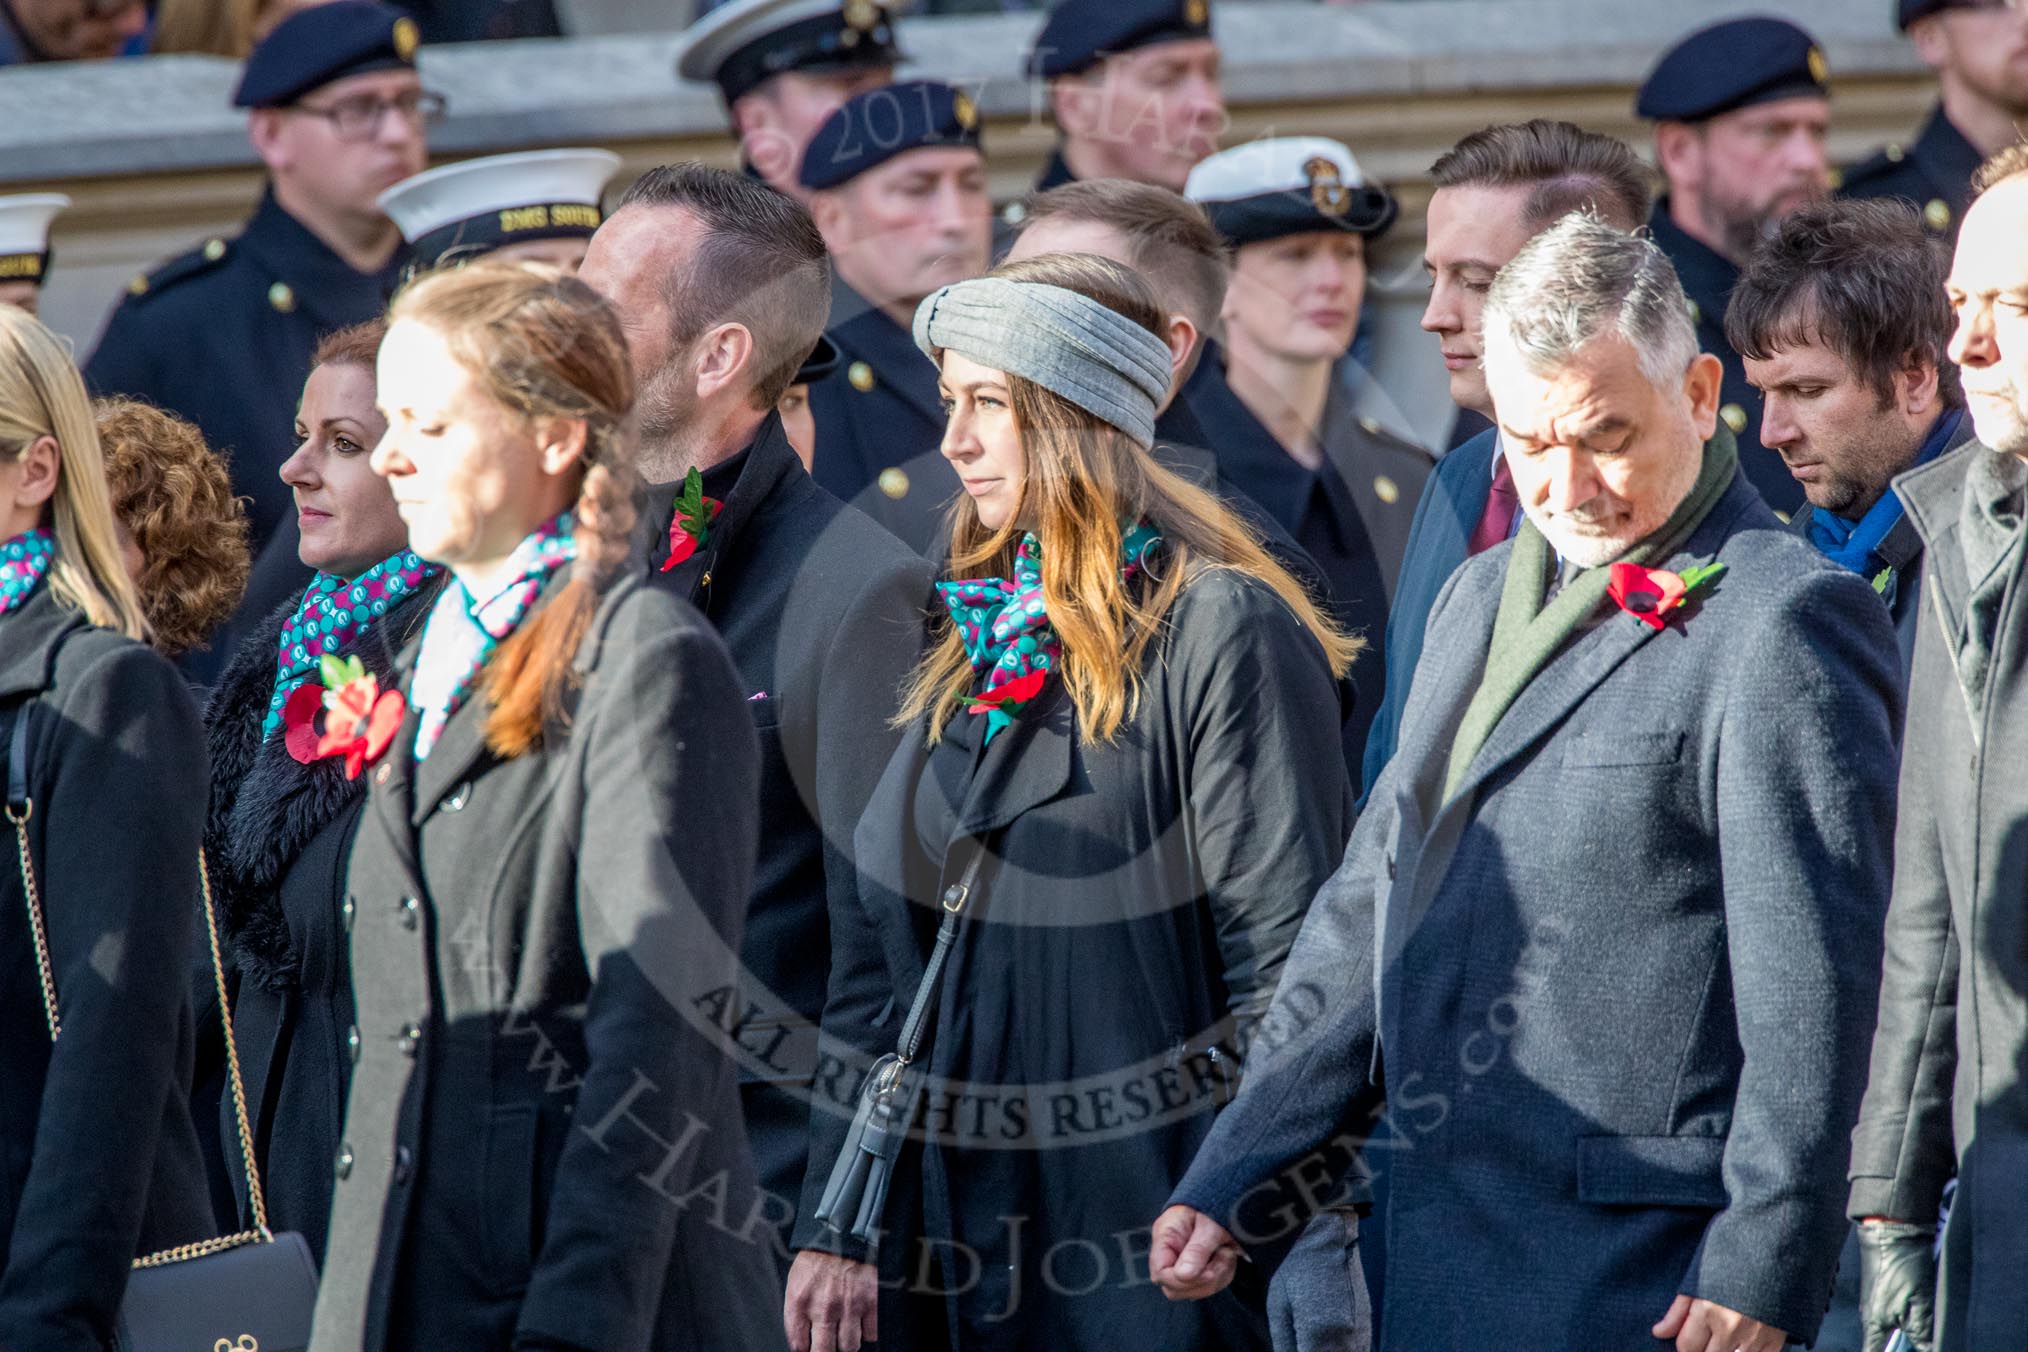 PDSA (Group M21, 36 members) during the Royal British Legion March Past on Remembrance Sunday at the Cenotaph, Whitehall, Westminster, London, 11 November 2018, 12:27.